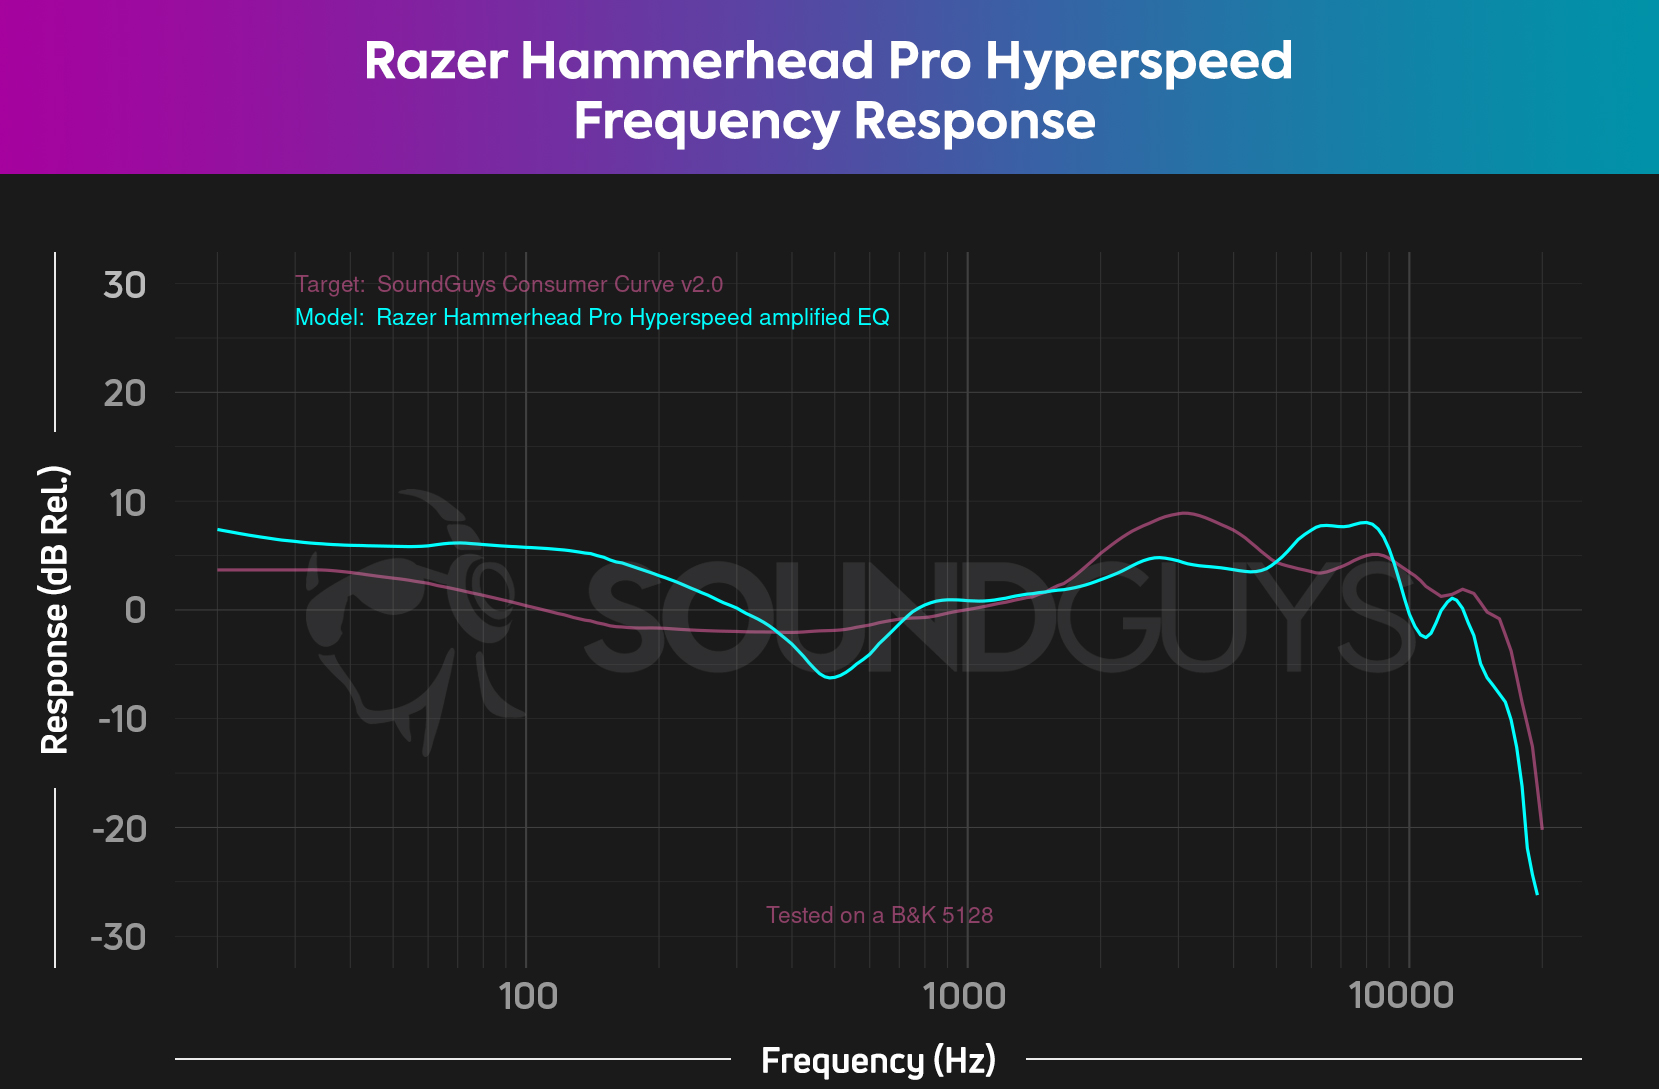 A chart of the Razer Hammerhead Pro Hyperspeed's "amplified EQ" frequency response.